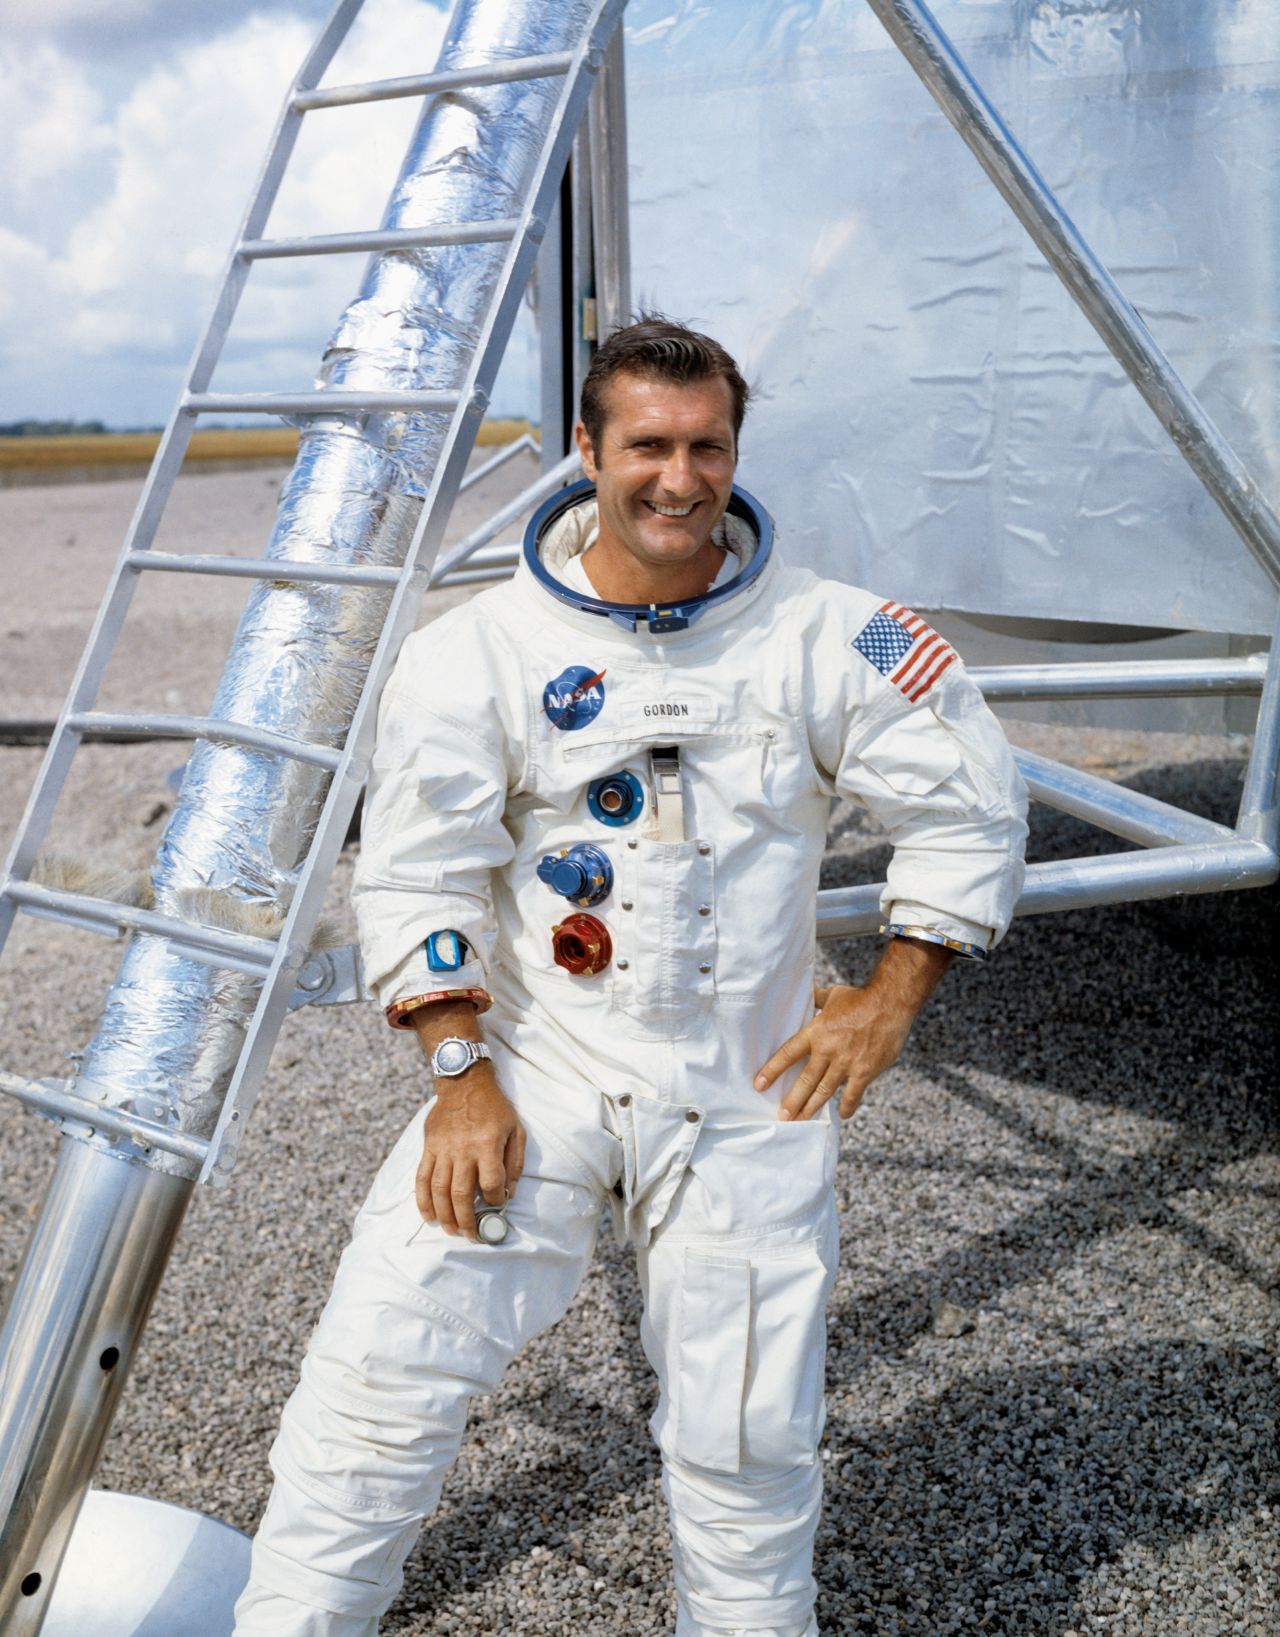 Former NASA astronaut Dick Gordon, the command module pilot on the second lunar landing mission, died on November 6. He was 88. Gordon spent more than 316 hours in space over two missions.